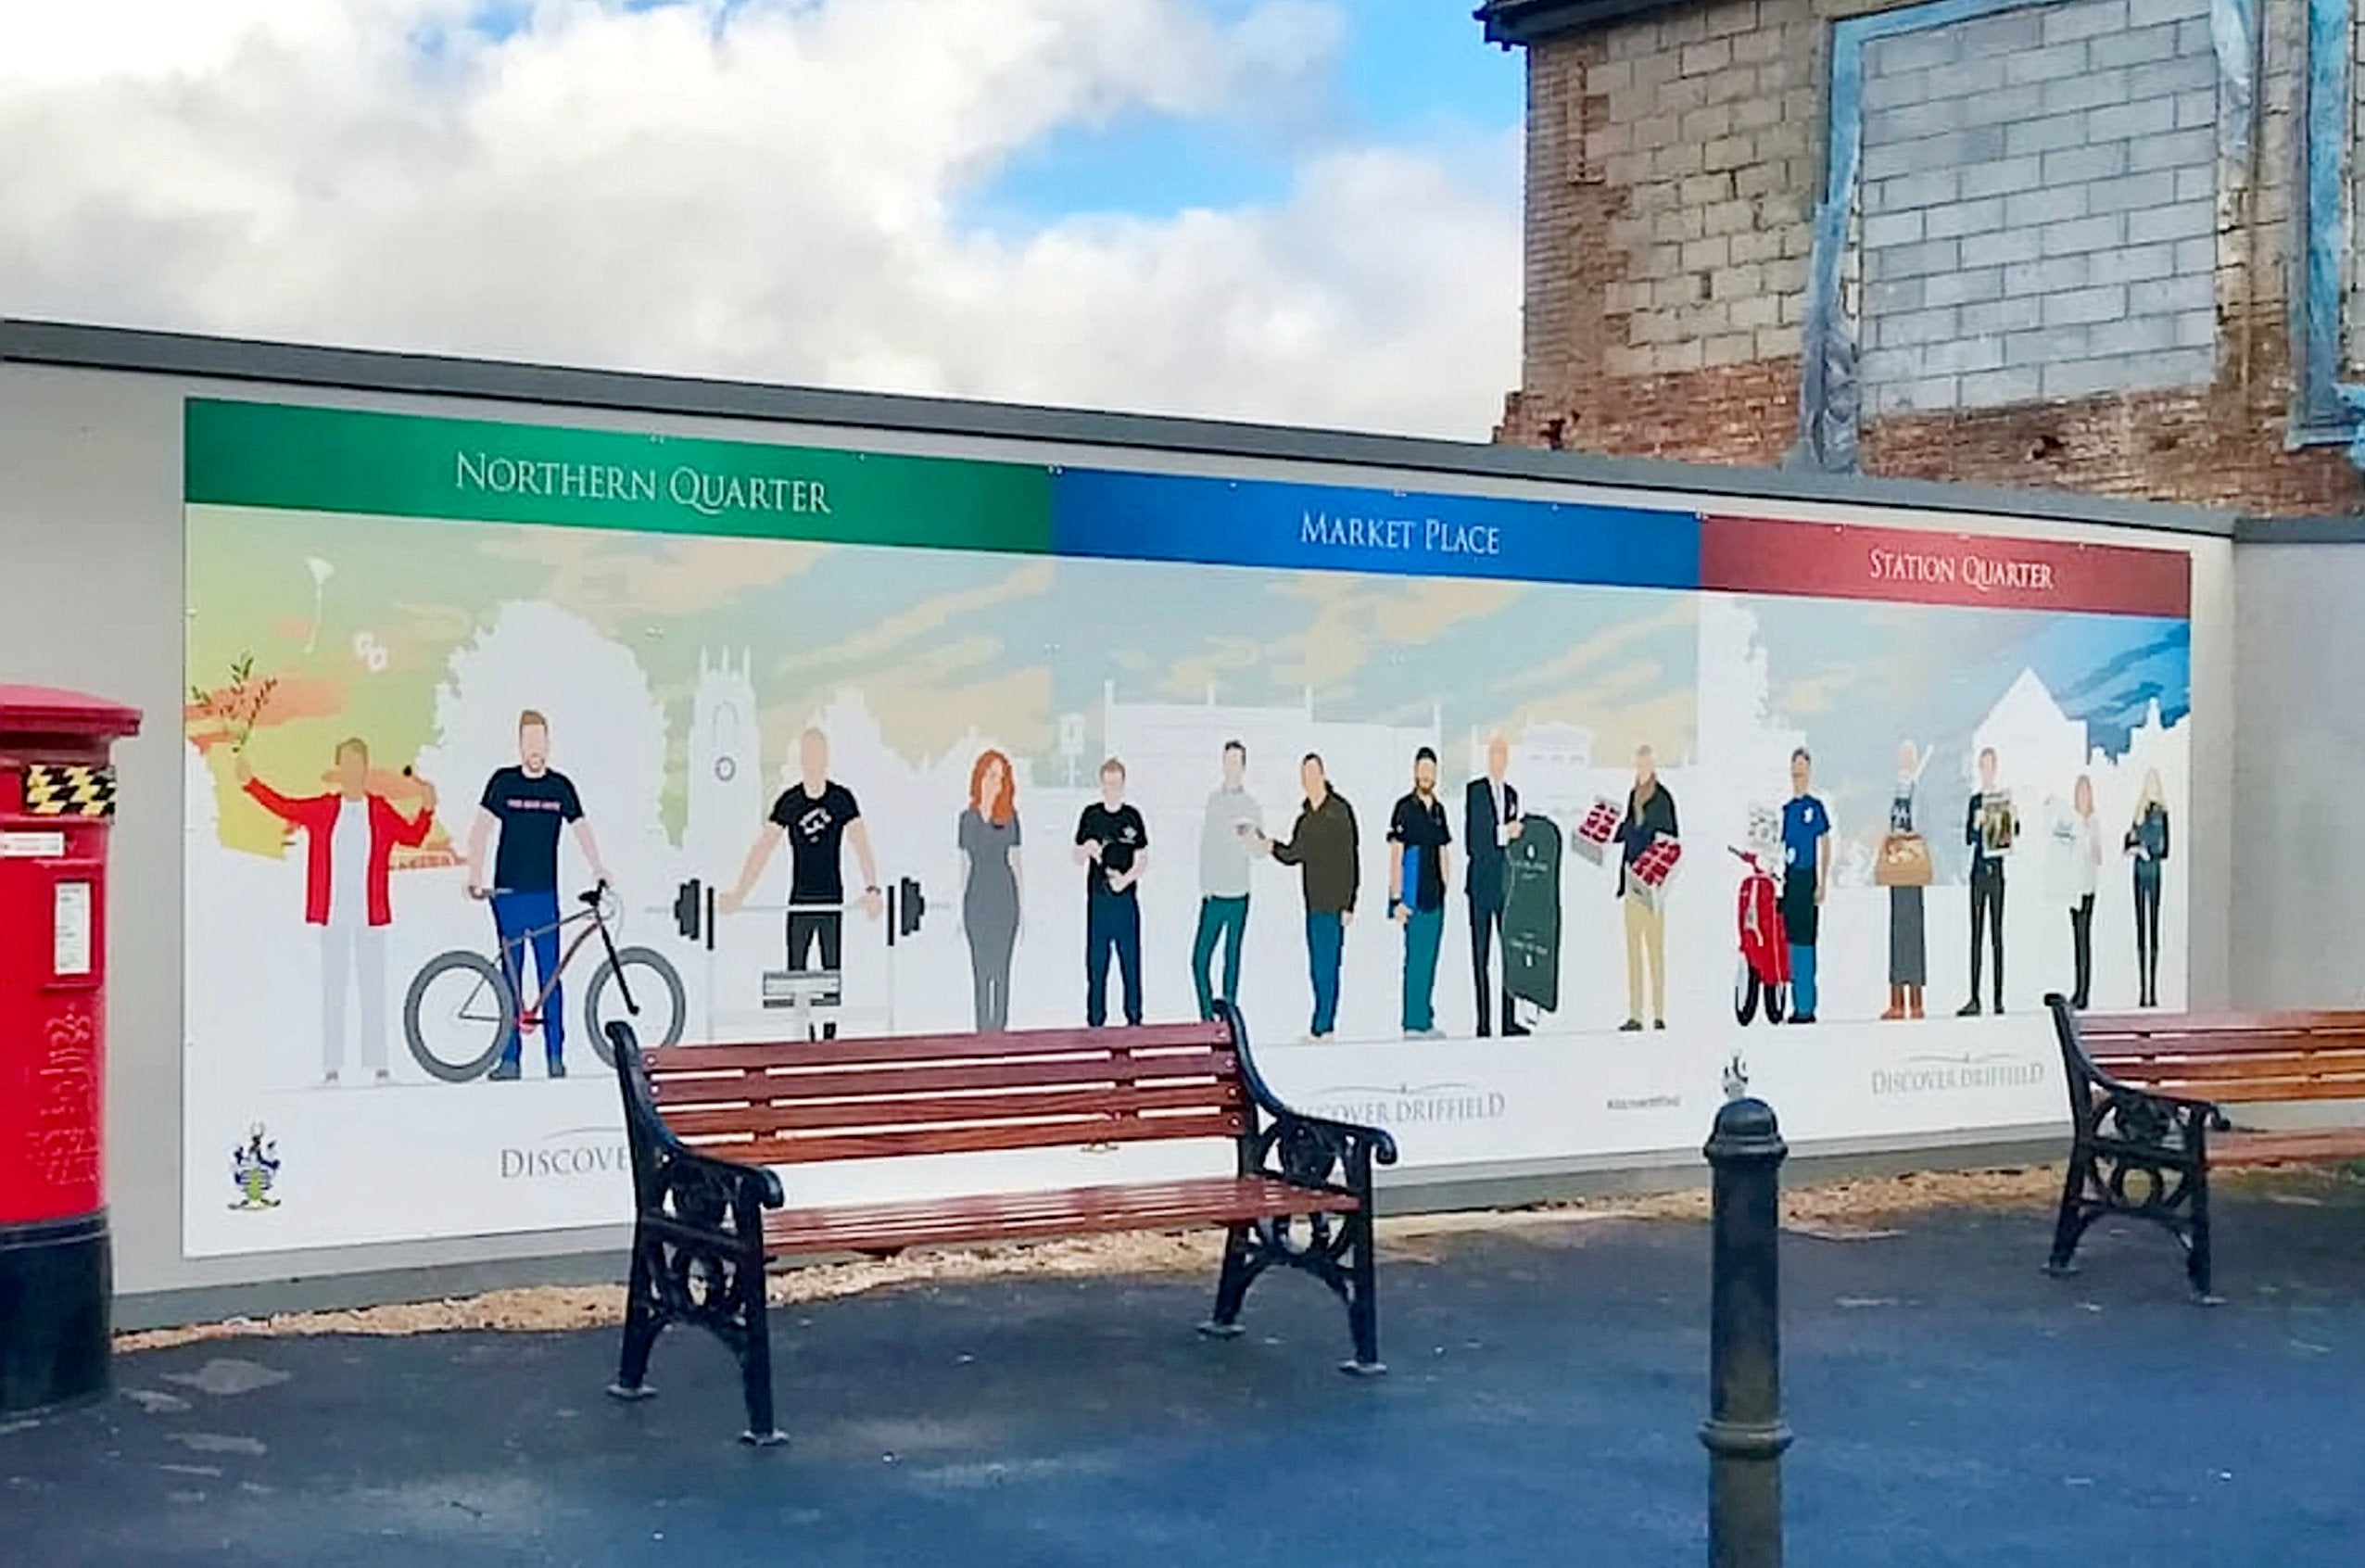 A mural designed as a tribute to shop staff who worked through the pandemic has been criticised because it only depicts white people